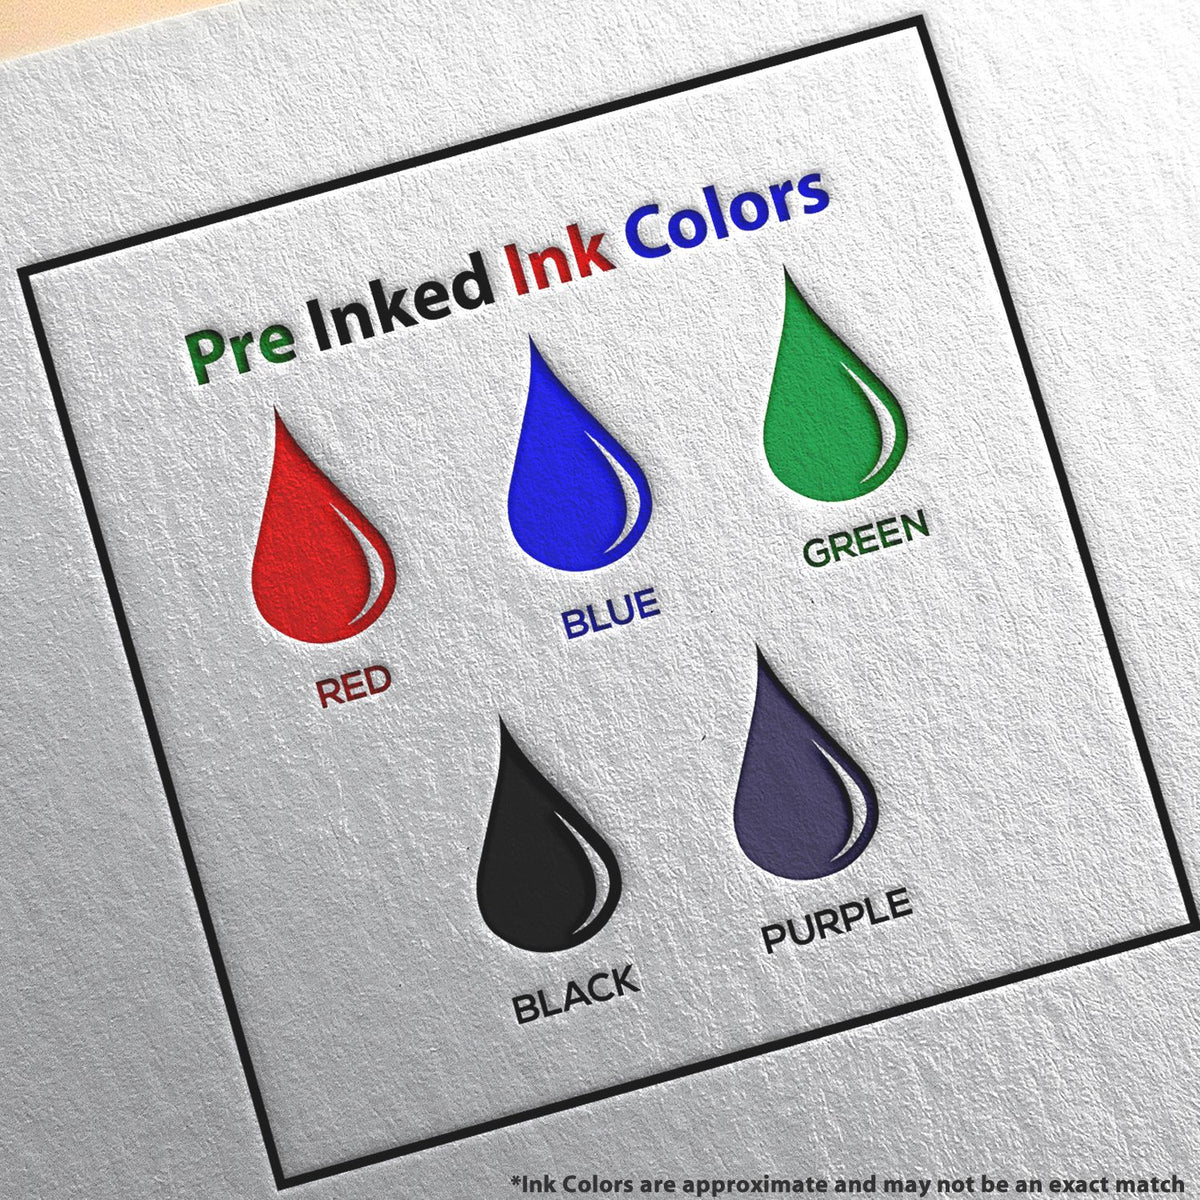 A picture showing the different ink colors or hues available for the Slim Pre-Inked Mississippi Architect Seal Stamp product.